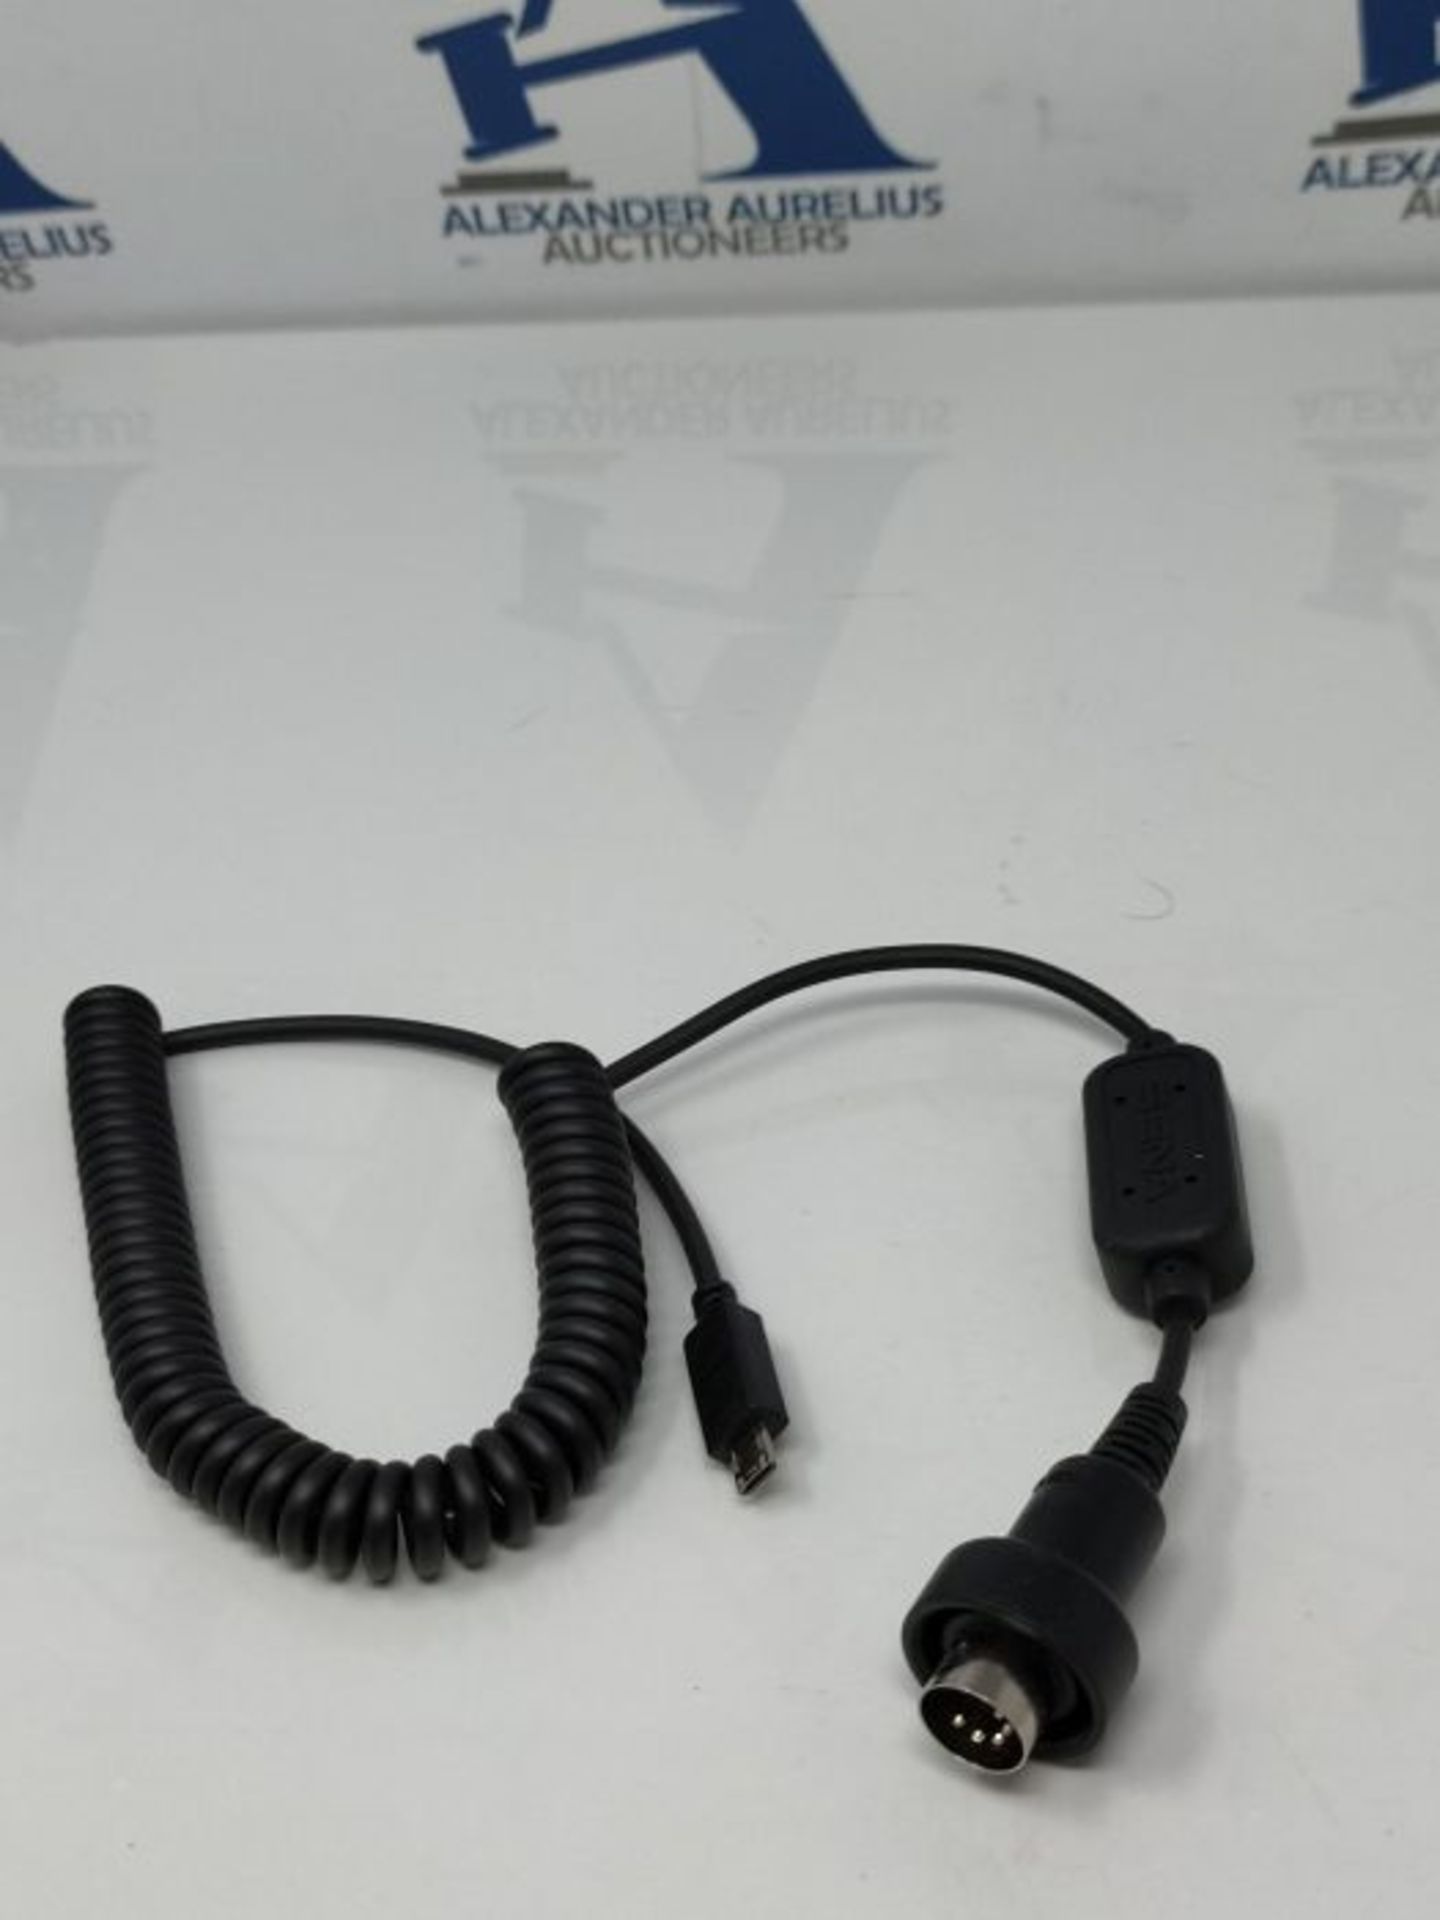 Sena Micro USB to 5 Pin DIN Cable for Honda Goldwing - Image 3 of 3